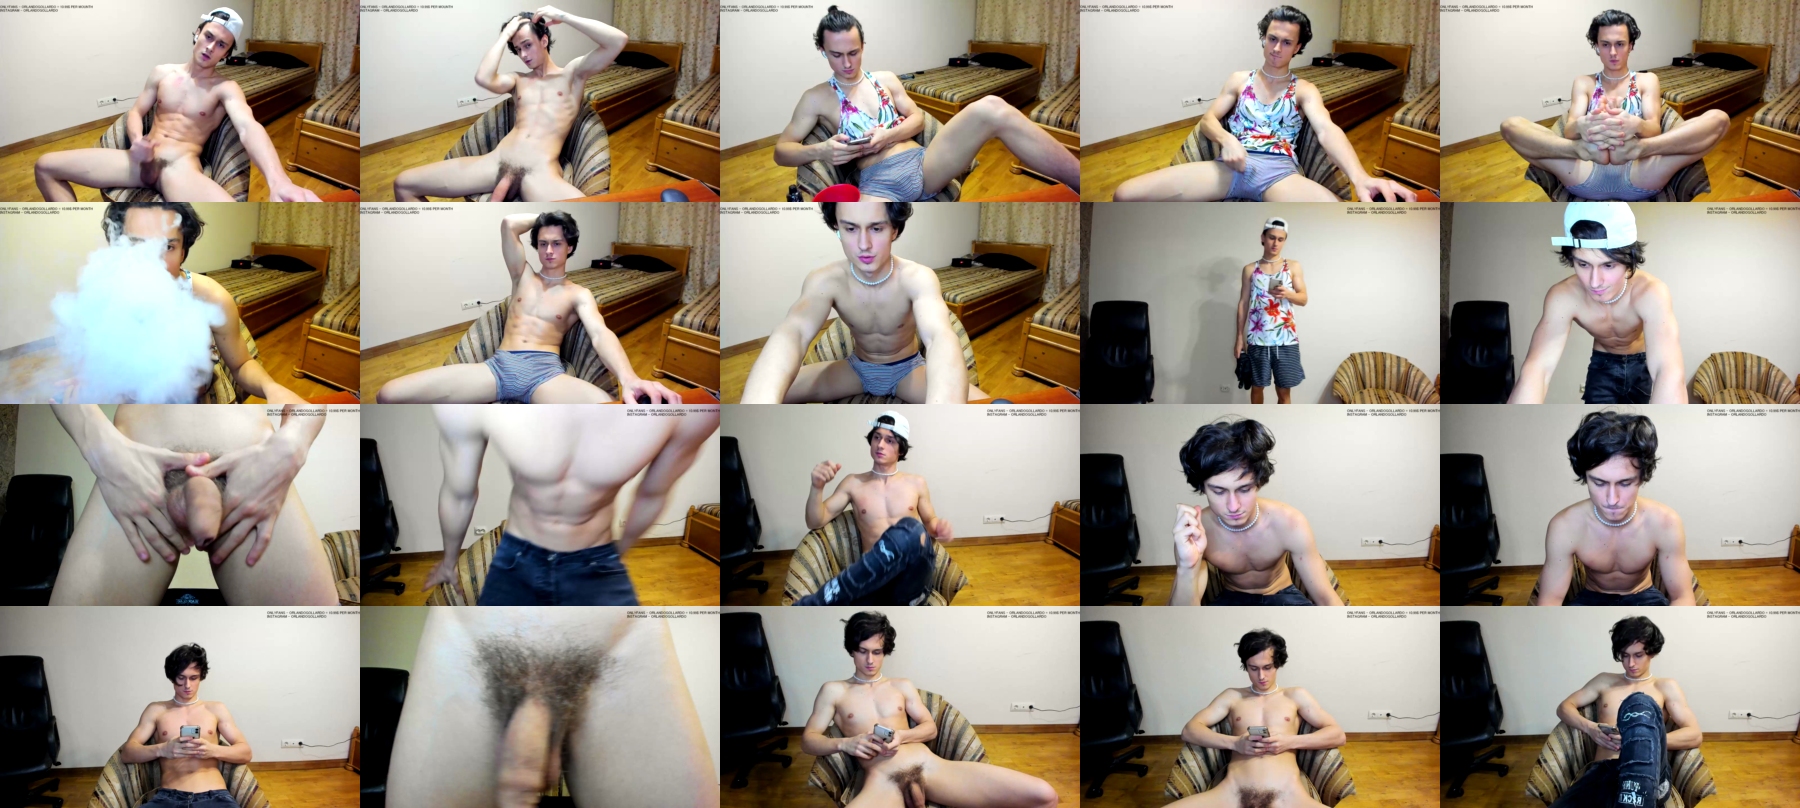 Orlando__Bloom Naked CAM SHOW @ Chaturbate 19-12-2021